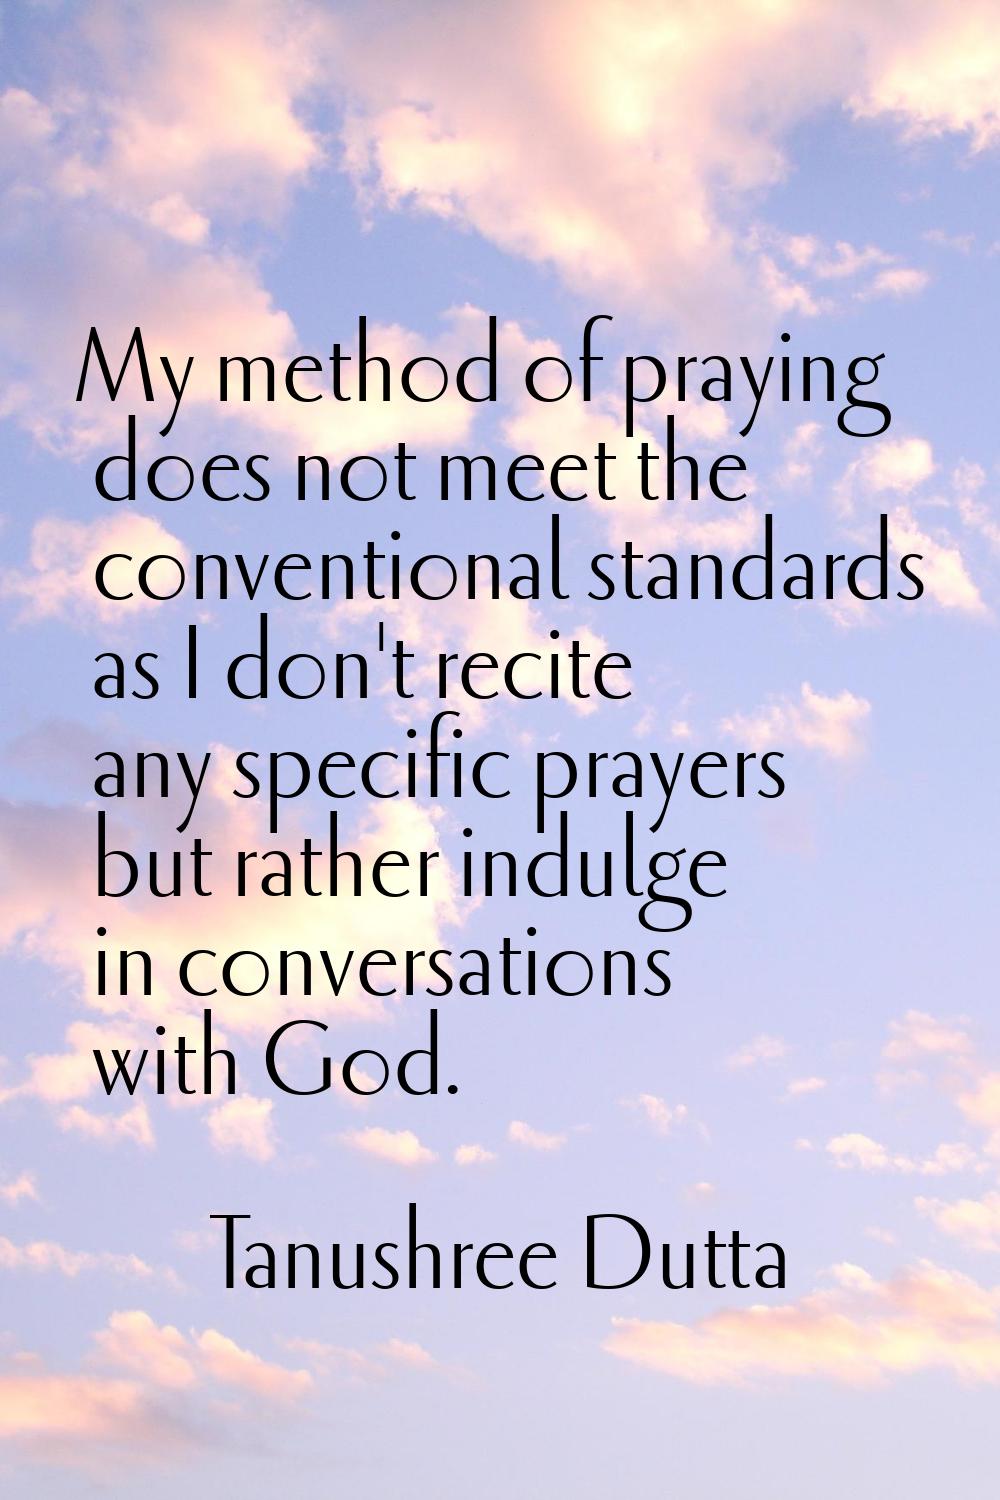 My method of praying does not meet the conventional standards as I don't recite any specific prayer